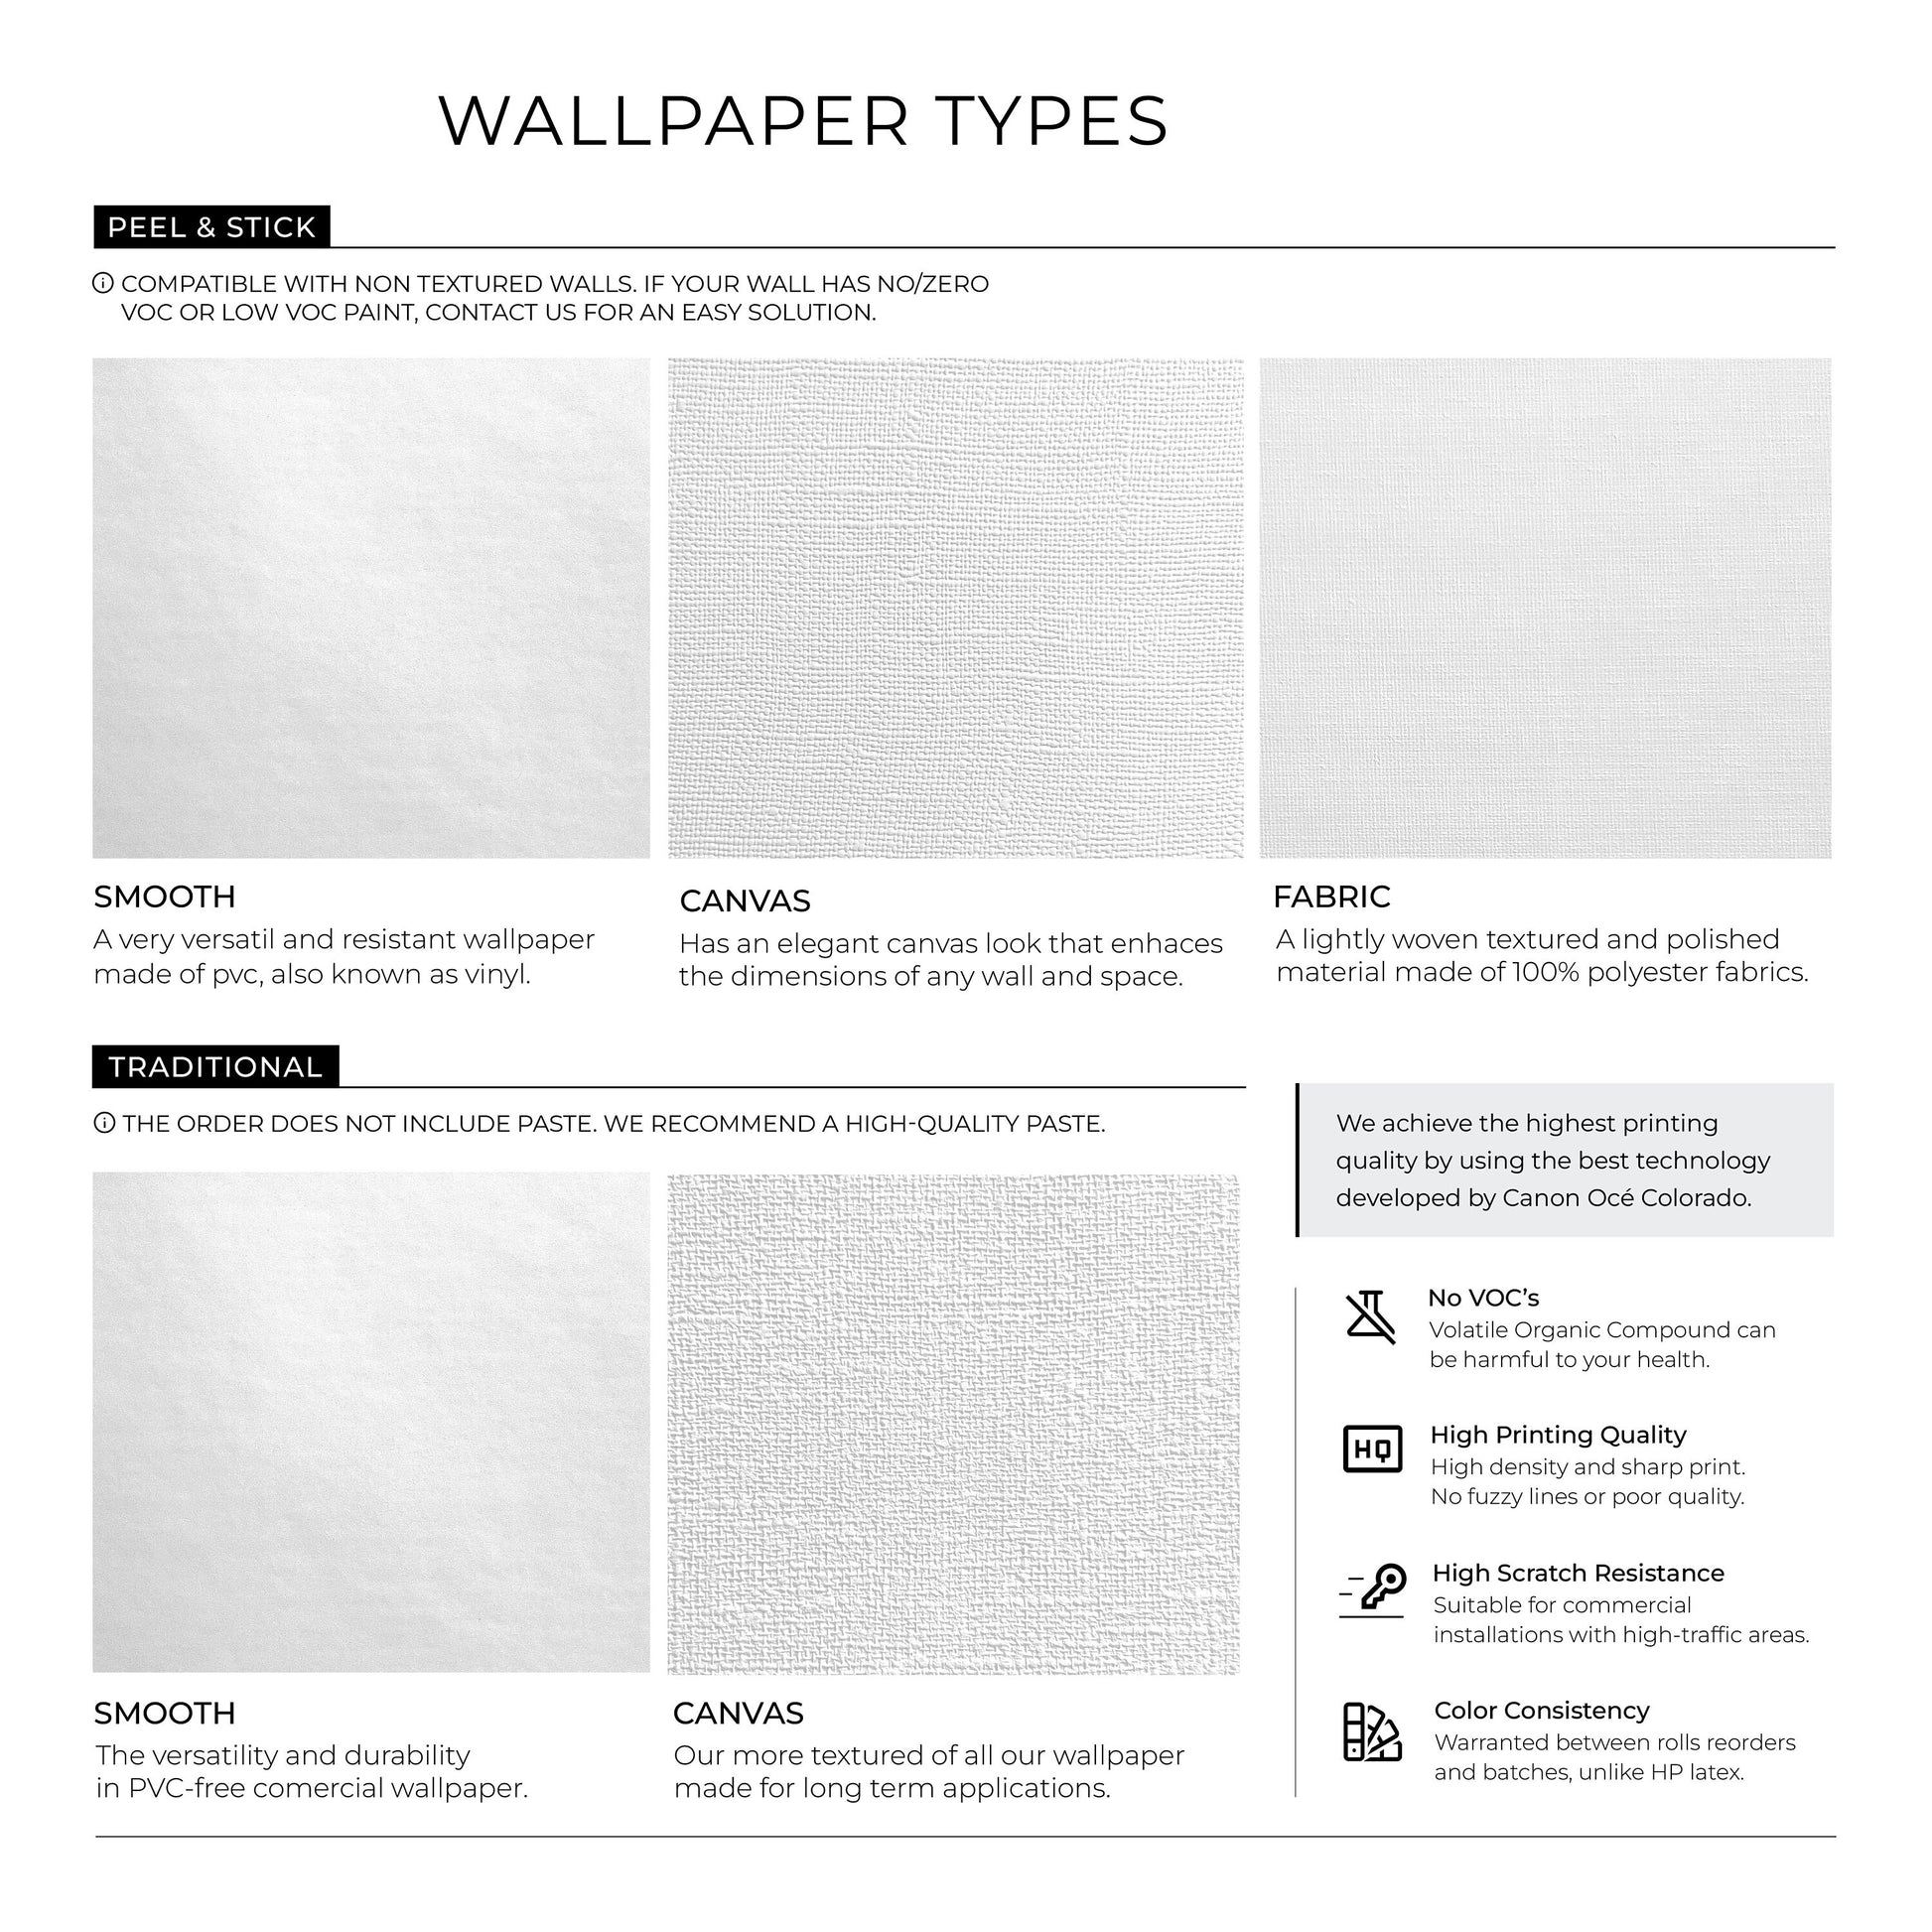 Removable Wallpaper, Temporary Wallpaper, Minimalistic Wallpaper, Peel and Stick Wallpaper, Wall Paper - A328